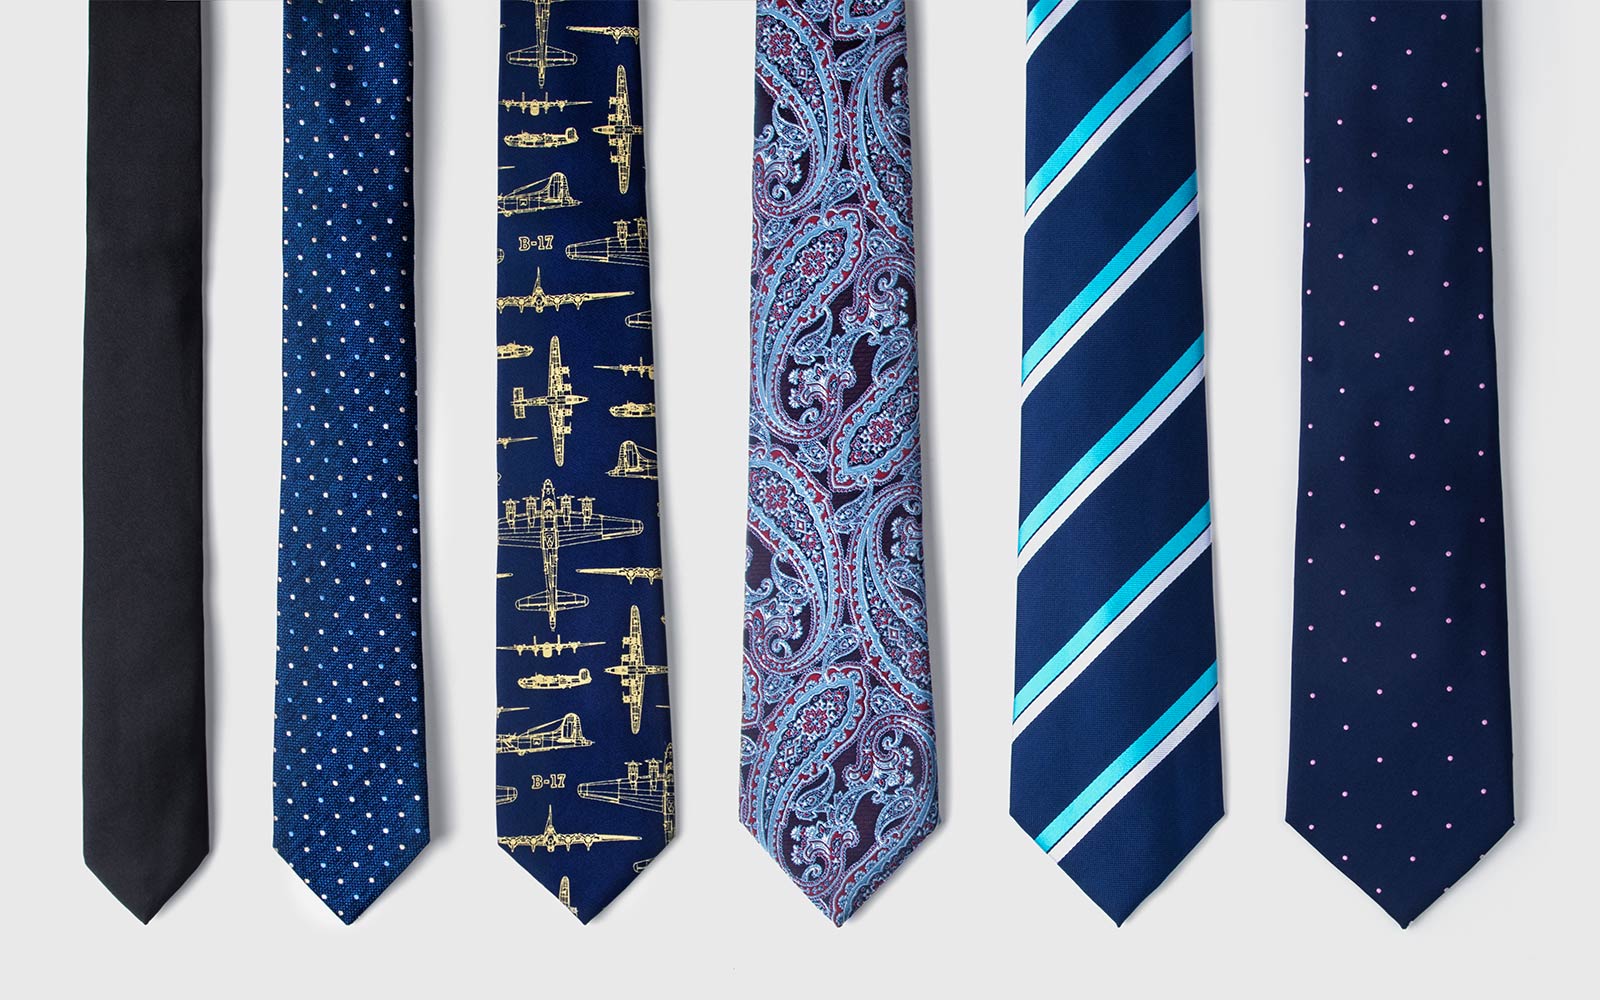 The New Way to Wear a Tie